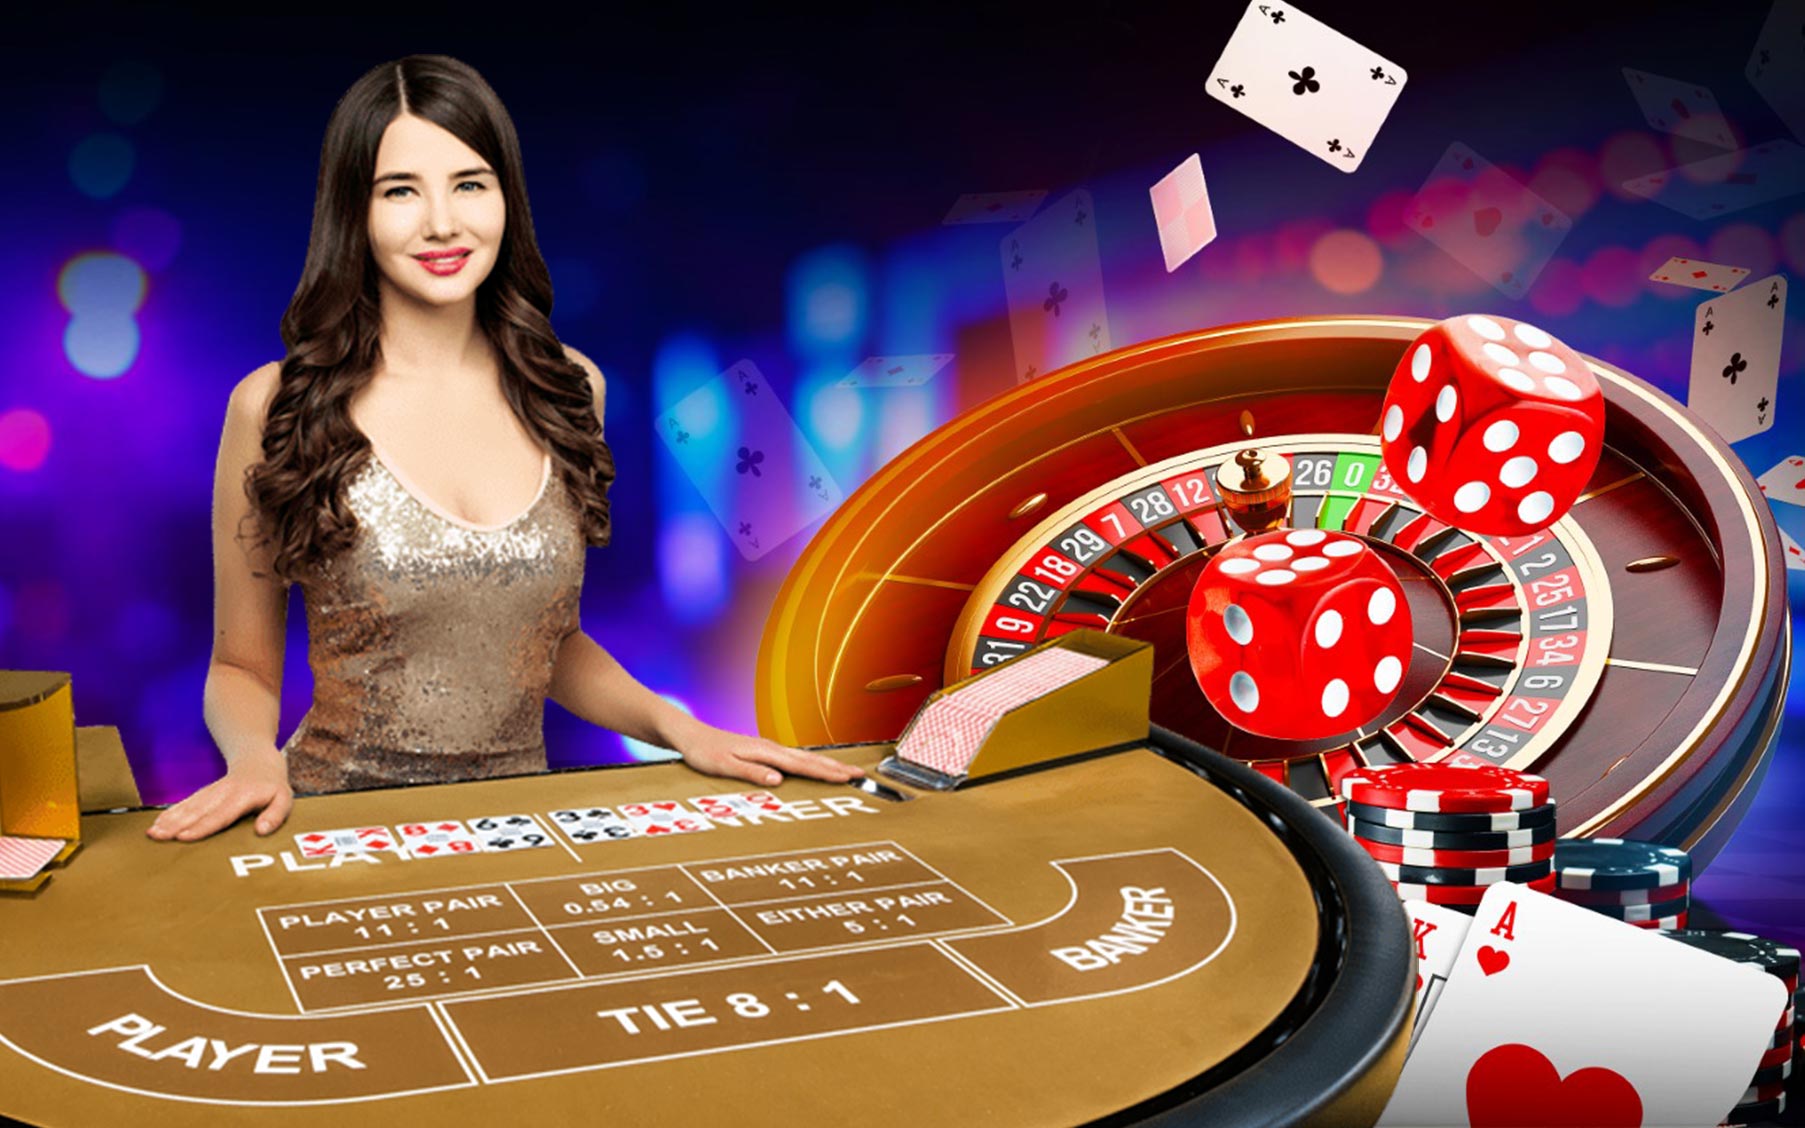 Pogibet - Pogibet gaming free 100 promo – play with the best online casino